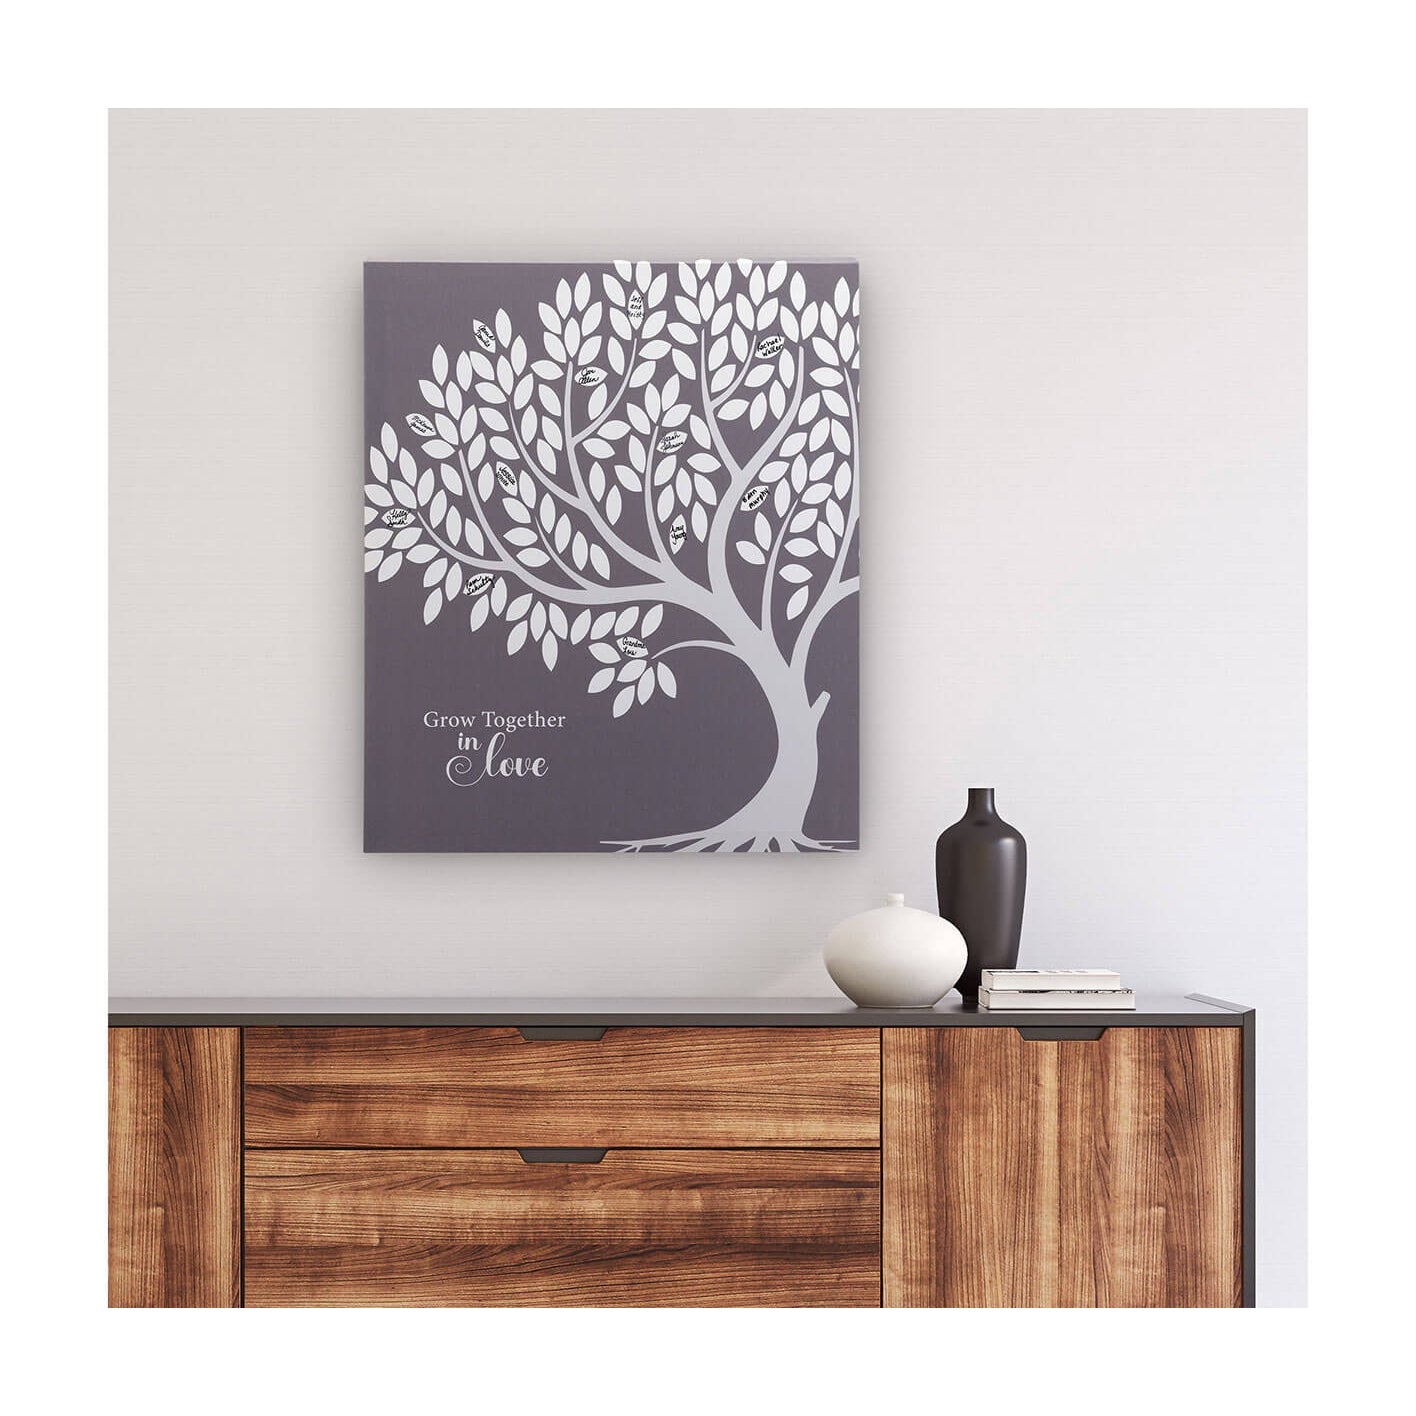 WEDDING TREE GUEST BOOK | Bridal Gift - Wedding Accessories - Alternative Signing Tree in Black - Minter and Richter Designs